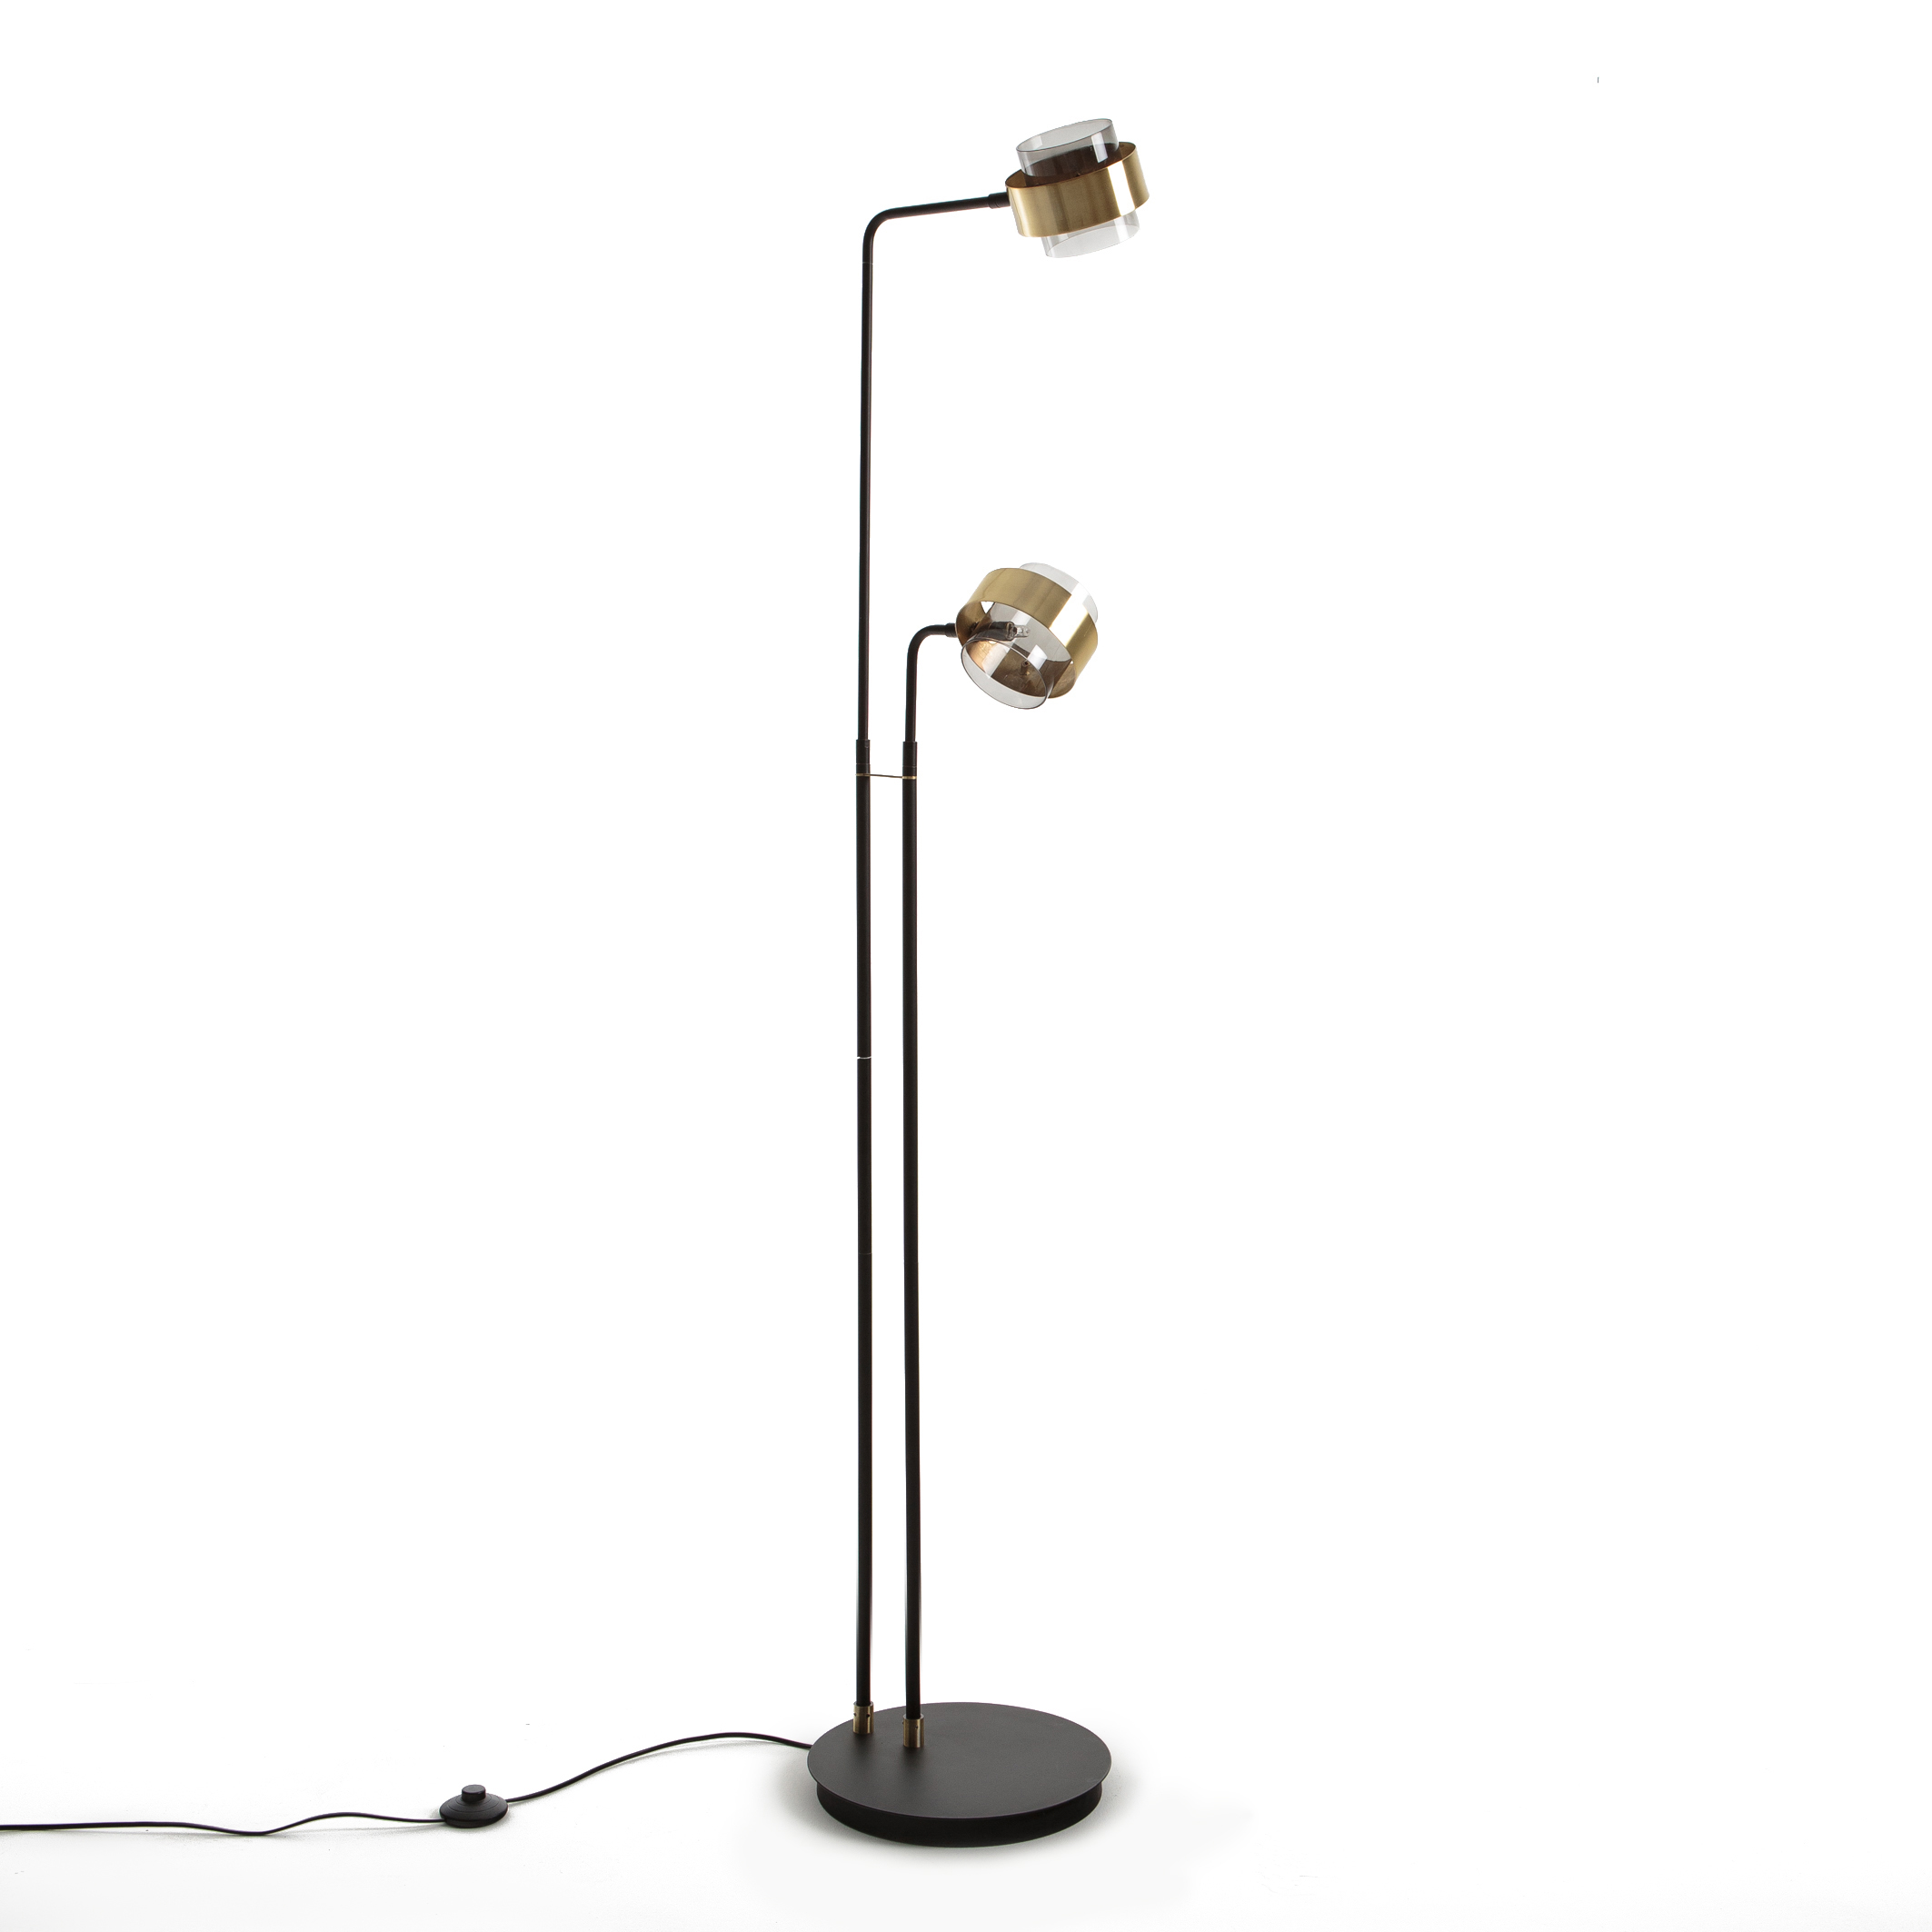 black/brass | lamp Redoute & Botello Redoute with adjustable floor metal Interieurs glass reading La La arms